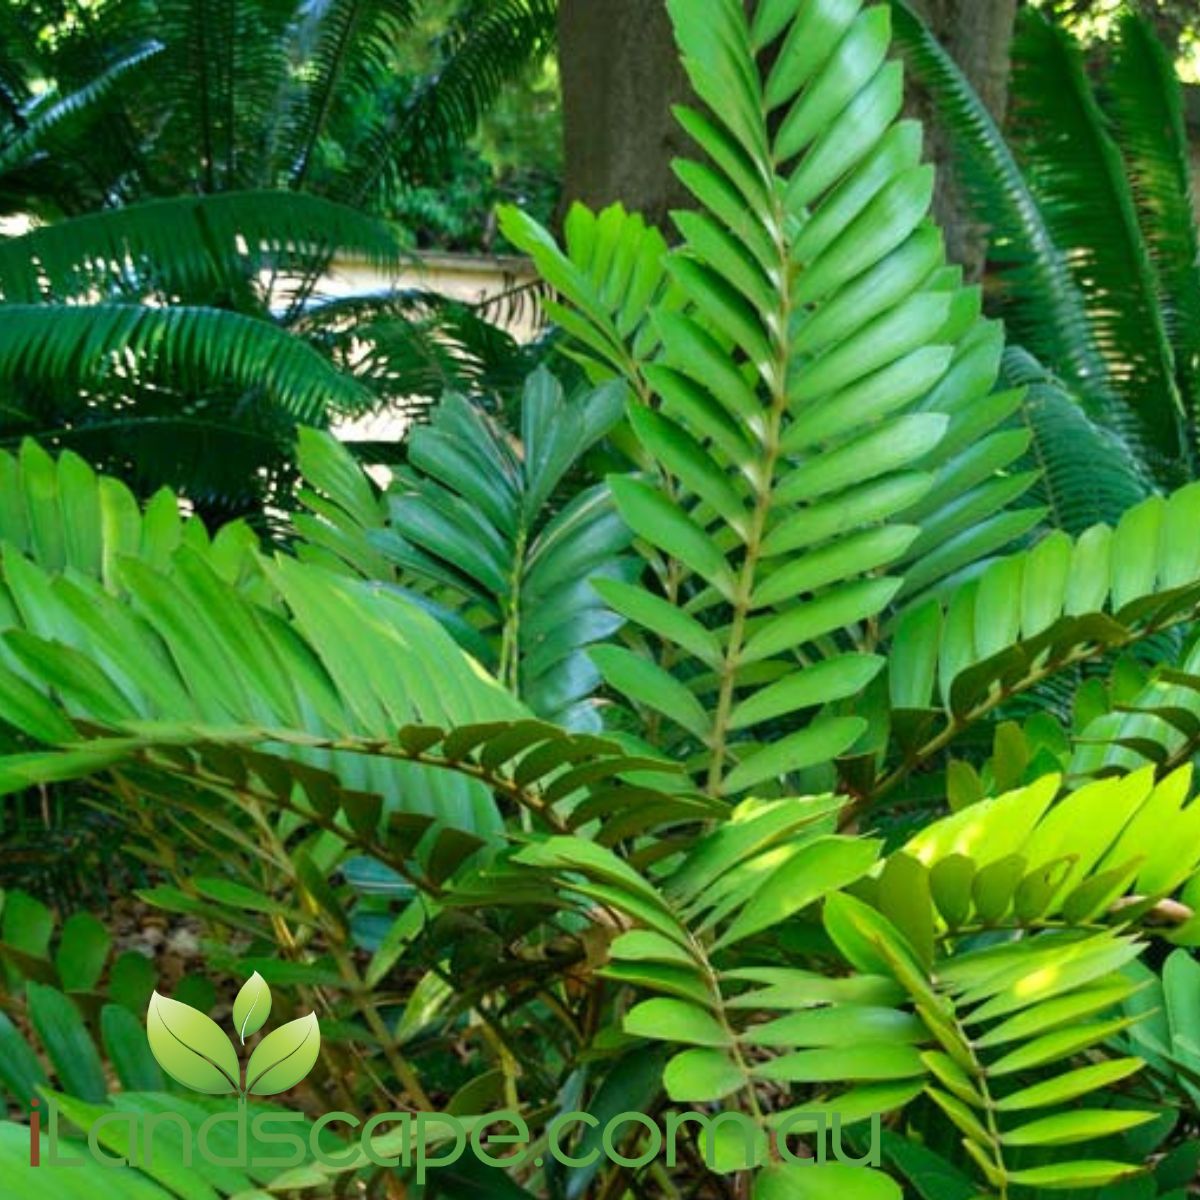 Zamia furfuracea is a cycad endemic to southeastern Veracruz state in eastern Mexico. Makes a very hardy plant in tropical gardens. desert gardens and coastal sites    Grows in Full sun to part shade and will get approx 1.0m tall long term